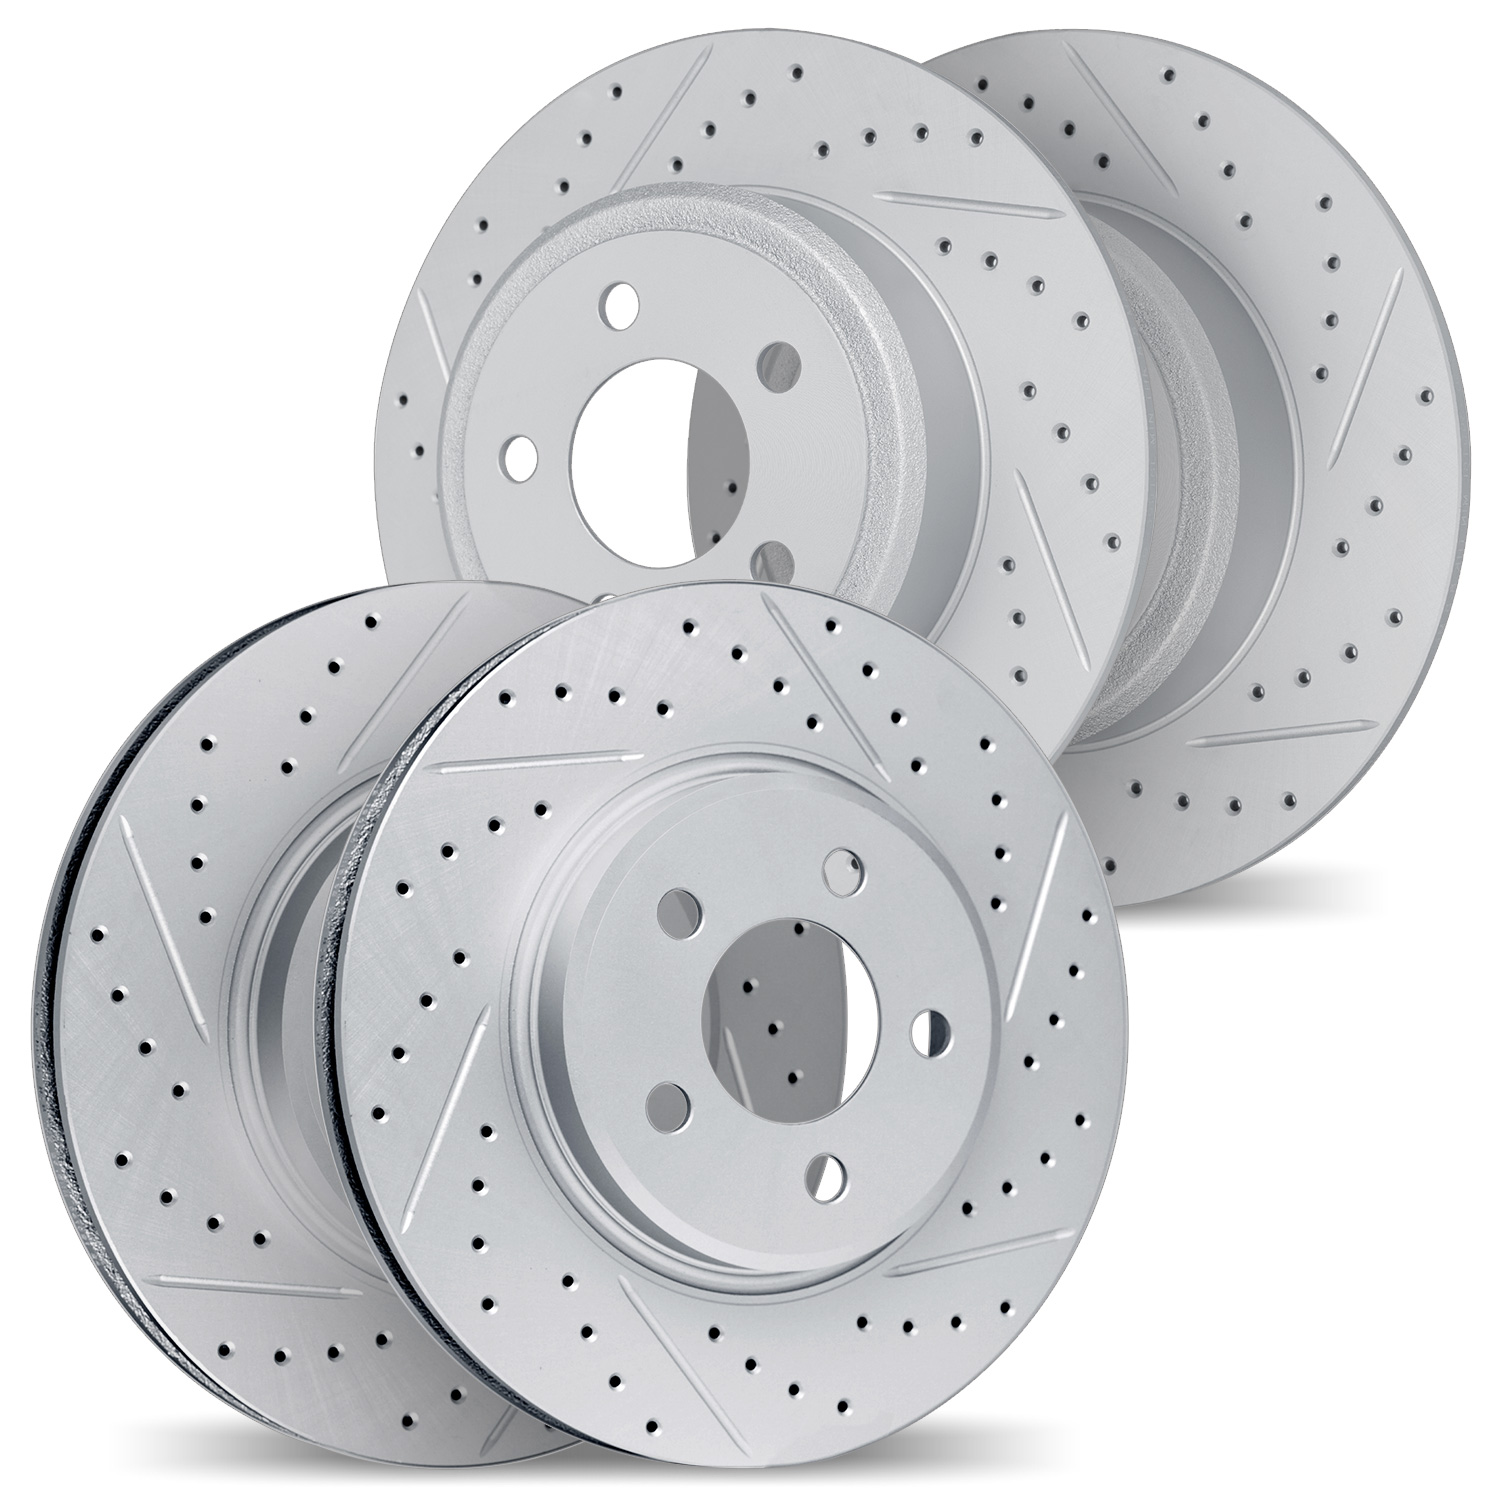 2004-74020 Geoperformance Drilled/Slotted Brake Rotors, 2005-2013 Audi/Volkswagen, Position: Front and Rear